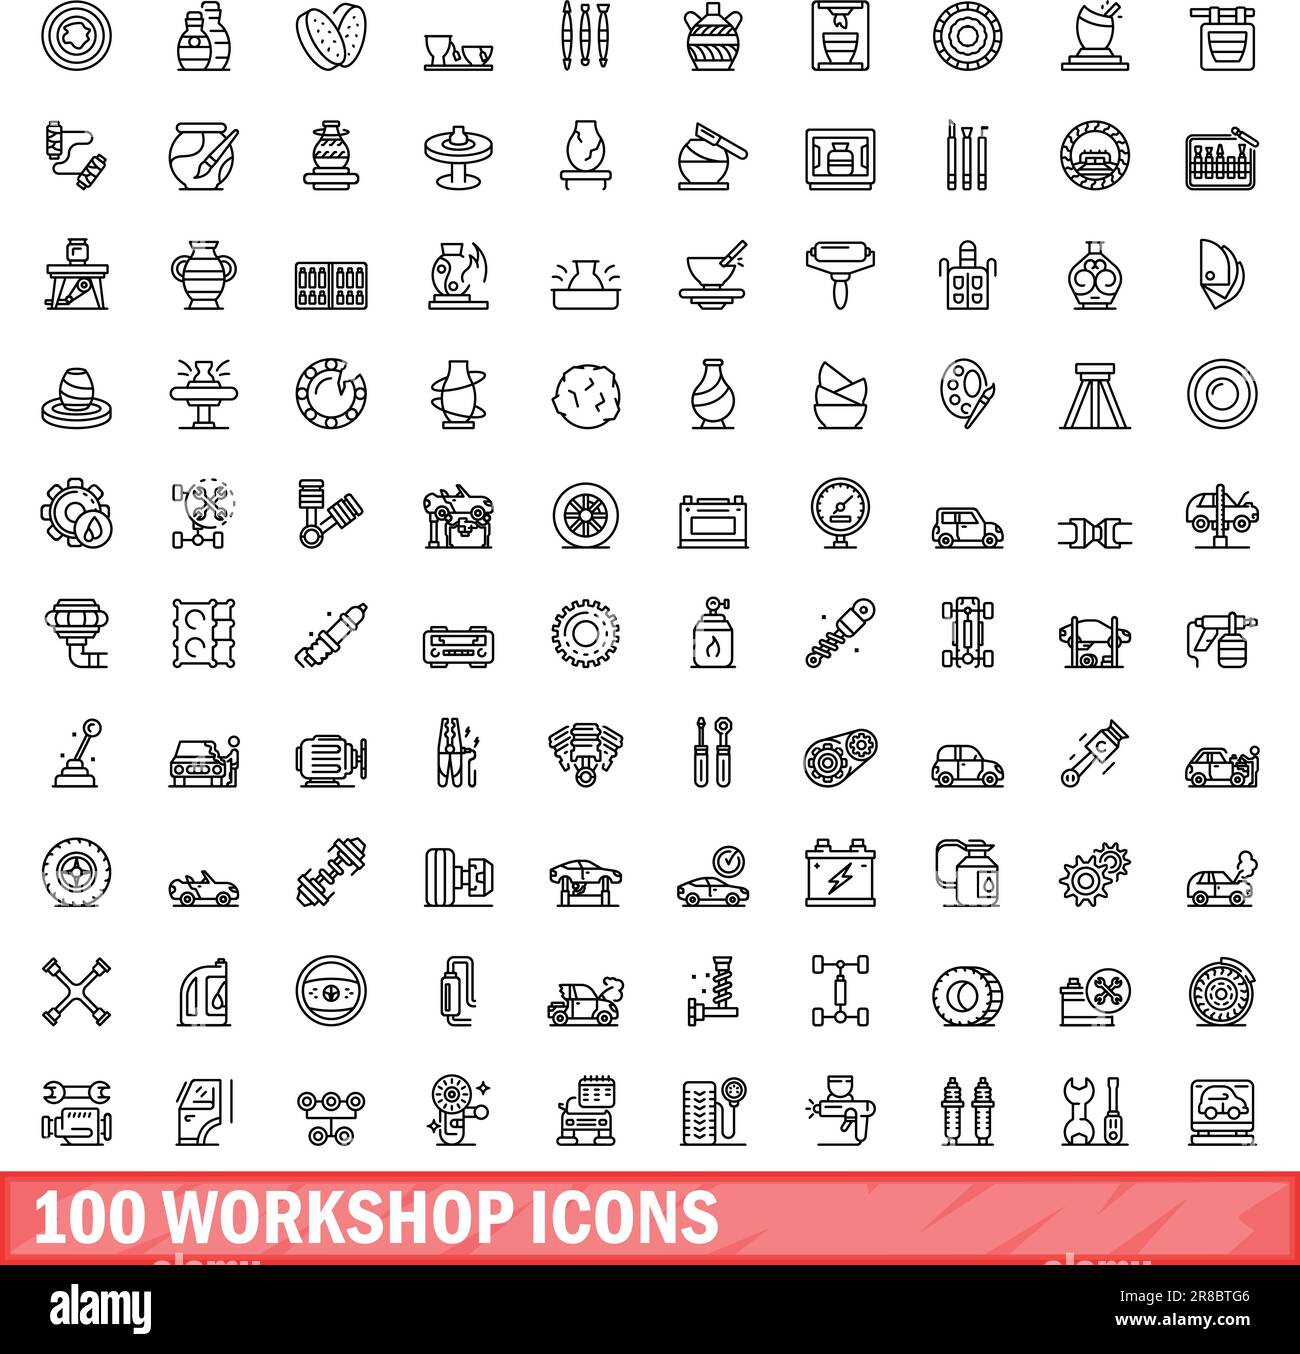 100 workshop icons set. Outline illustration of 100 workshop icons vector set isolated on white background Stock Vector